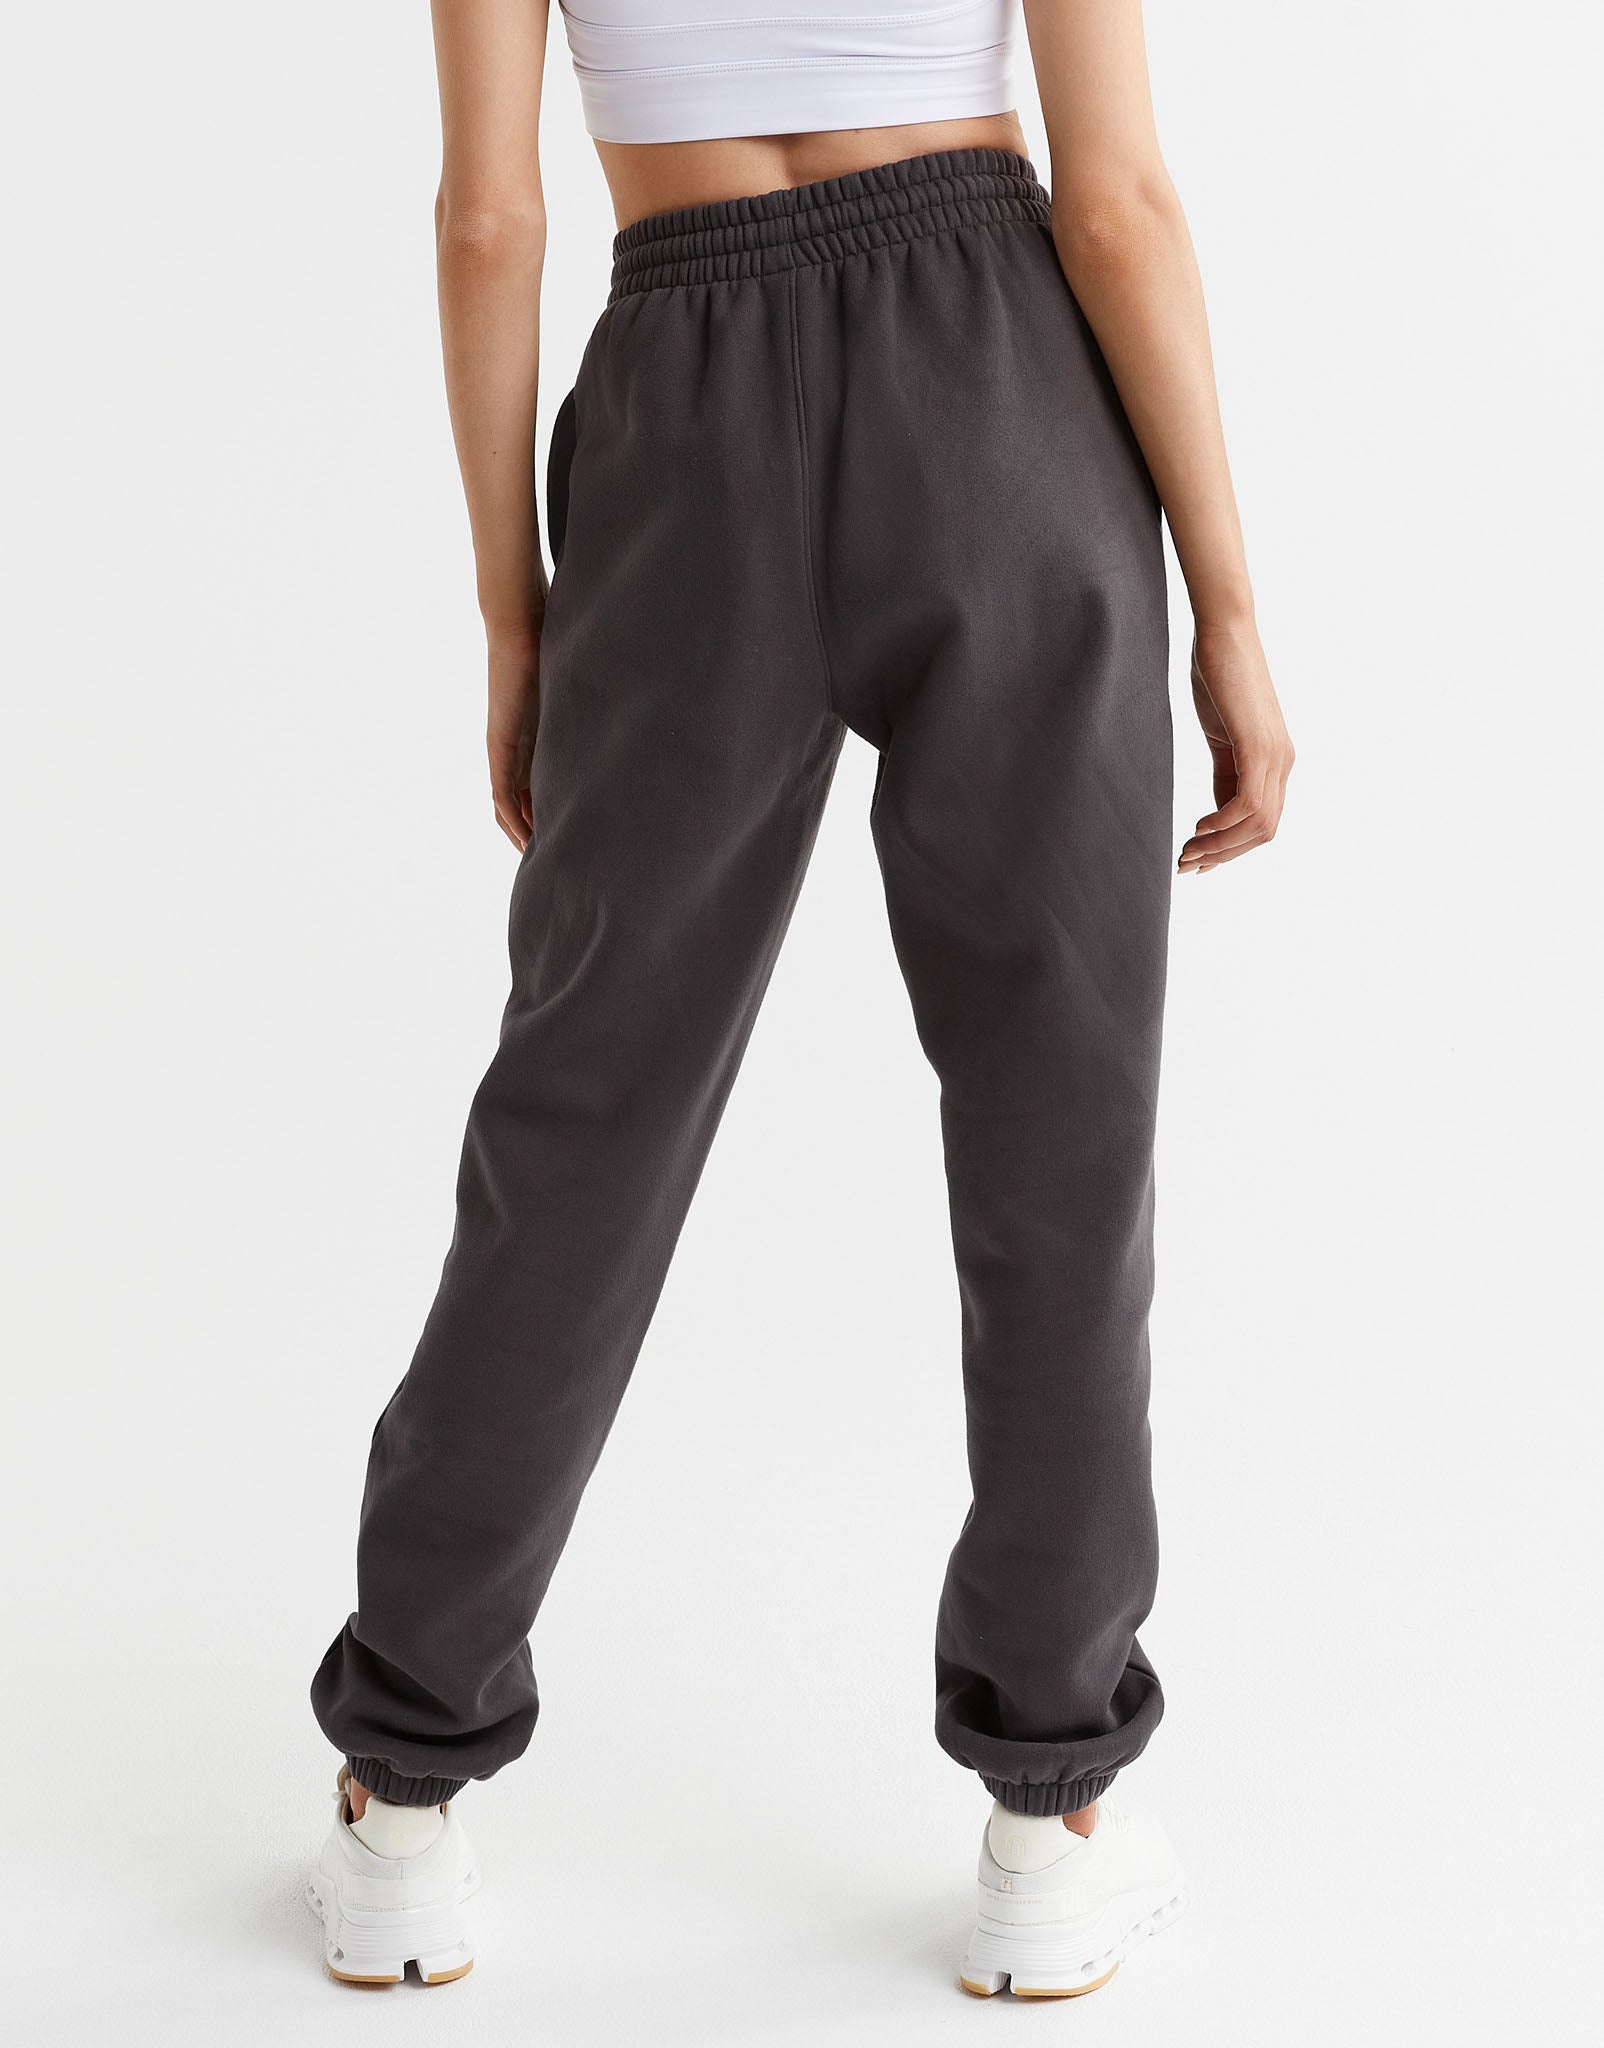 Lilybod-Lucy-Oversized-Fleece-Track-Pant-Coal-Gray-LL89-CLG-5-New.jpeg